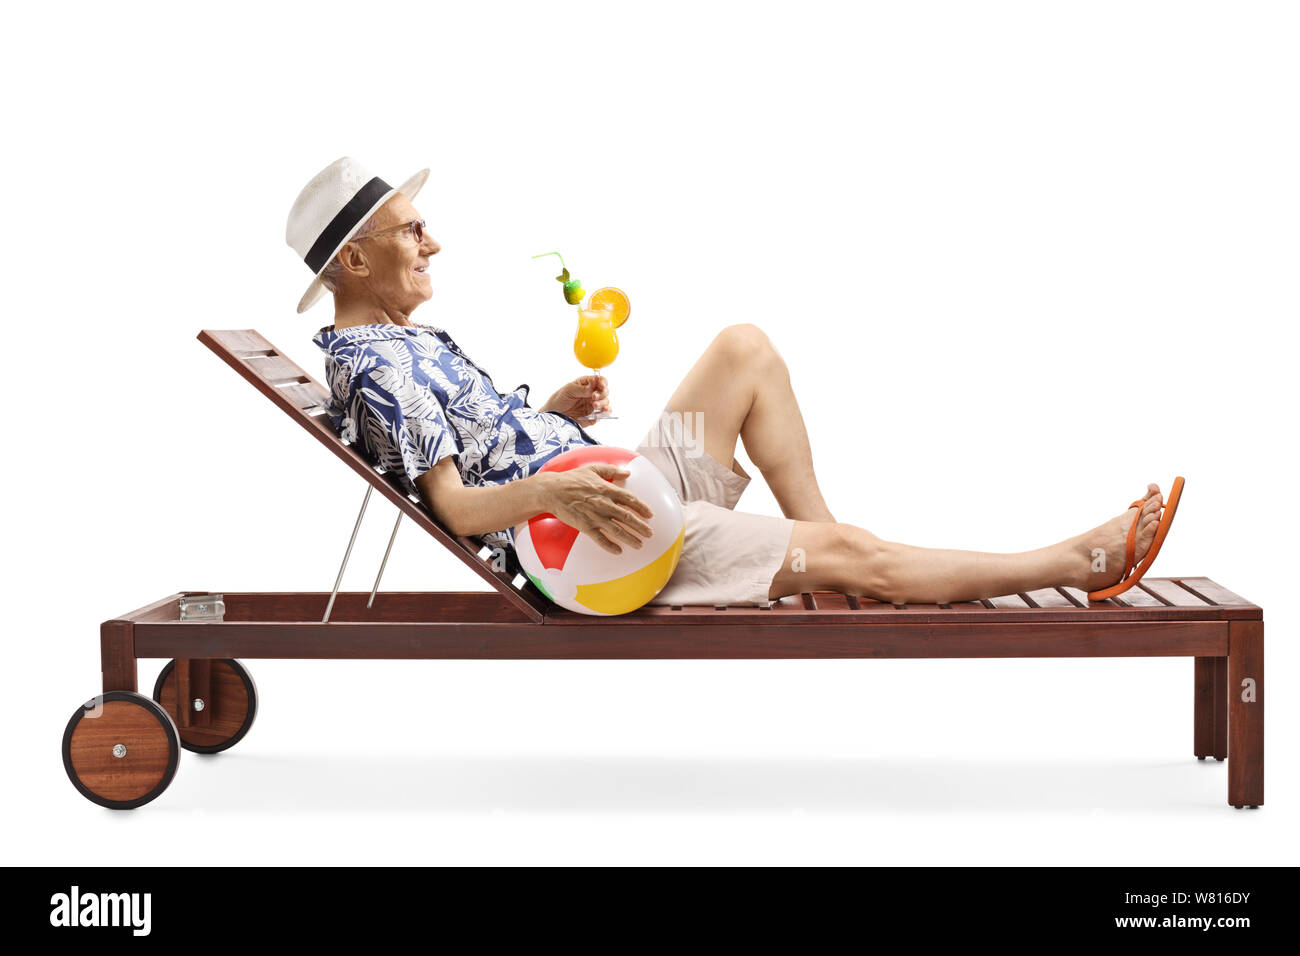 Full length profile shot of an elderly man lying on a sunbed drinking a cocktail and holding an inflatable beach ball isolated on white background Stock Photo